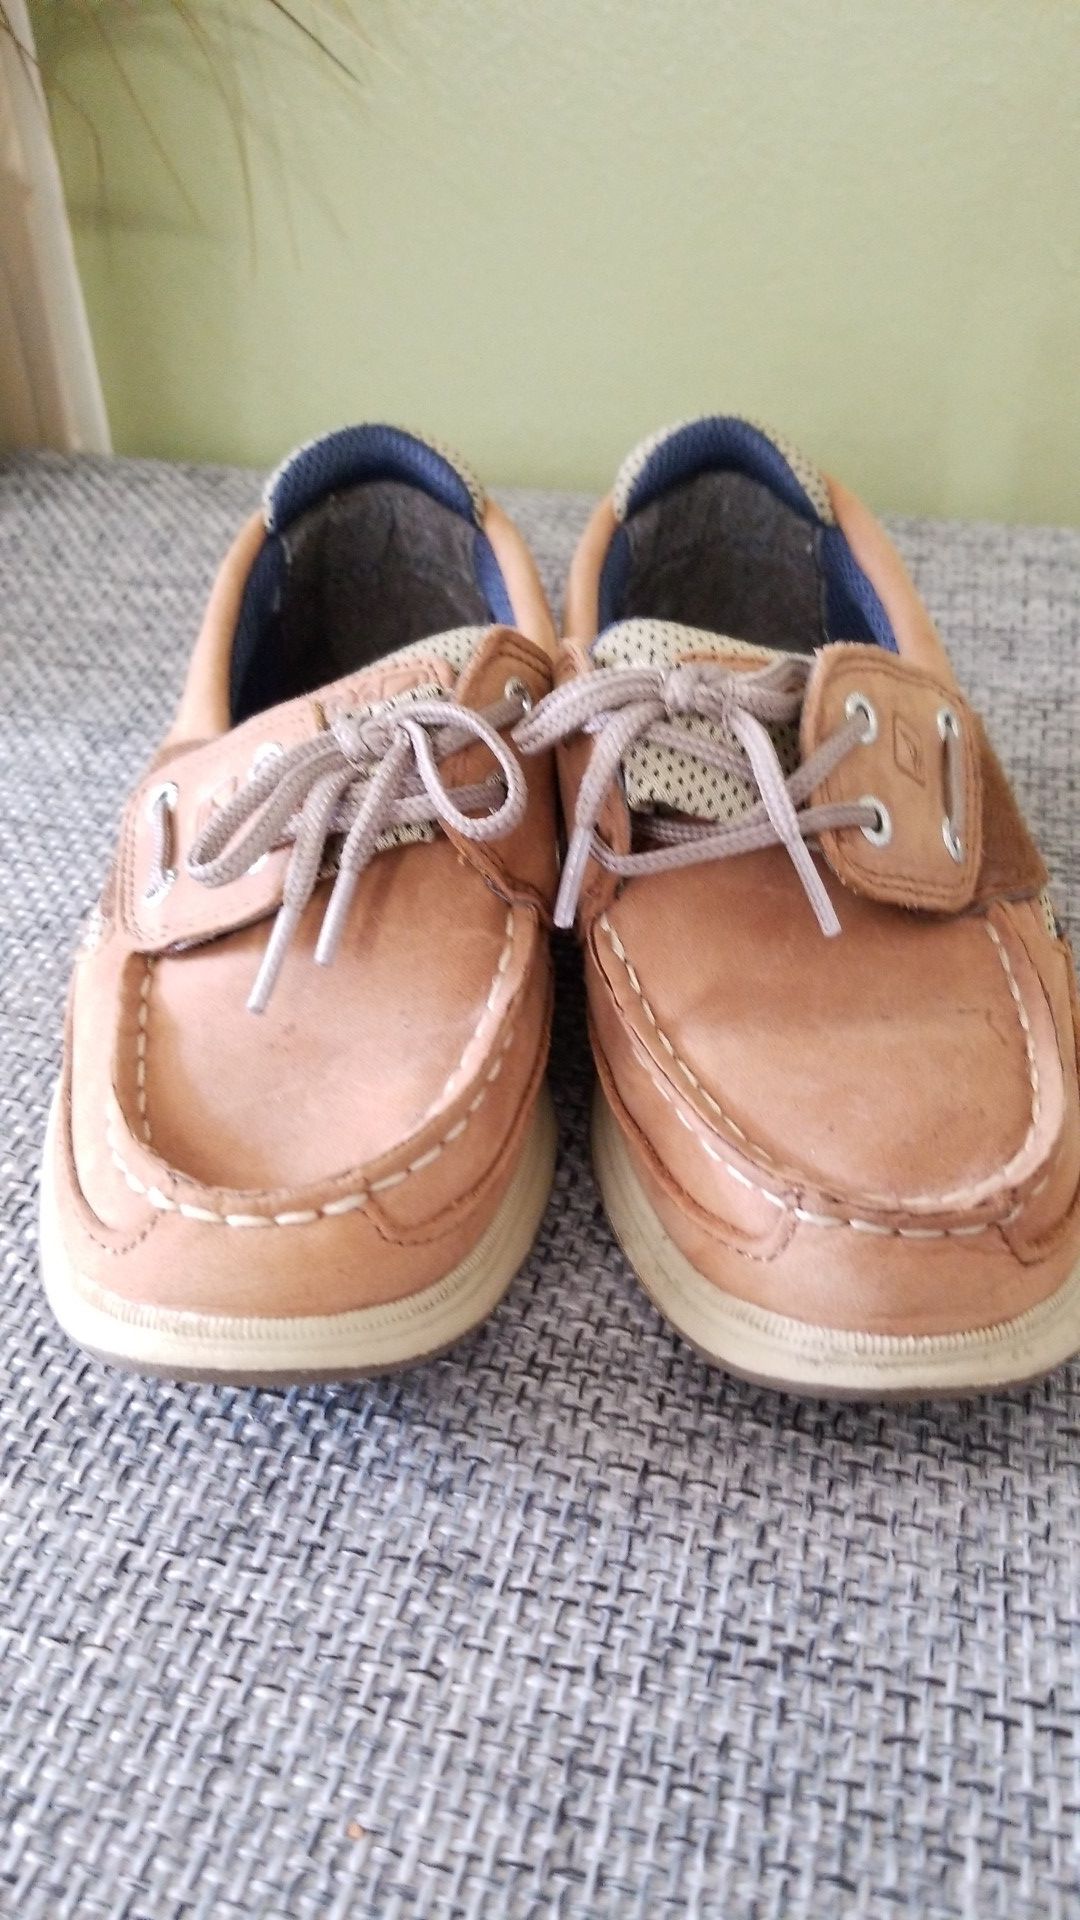 Boys Sperry Topsider size 12